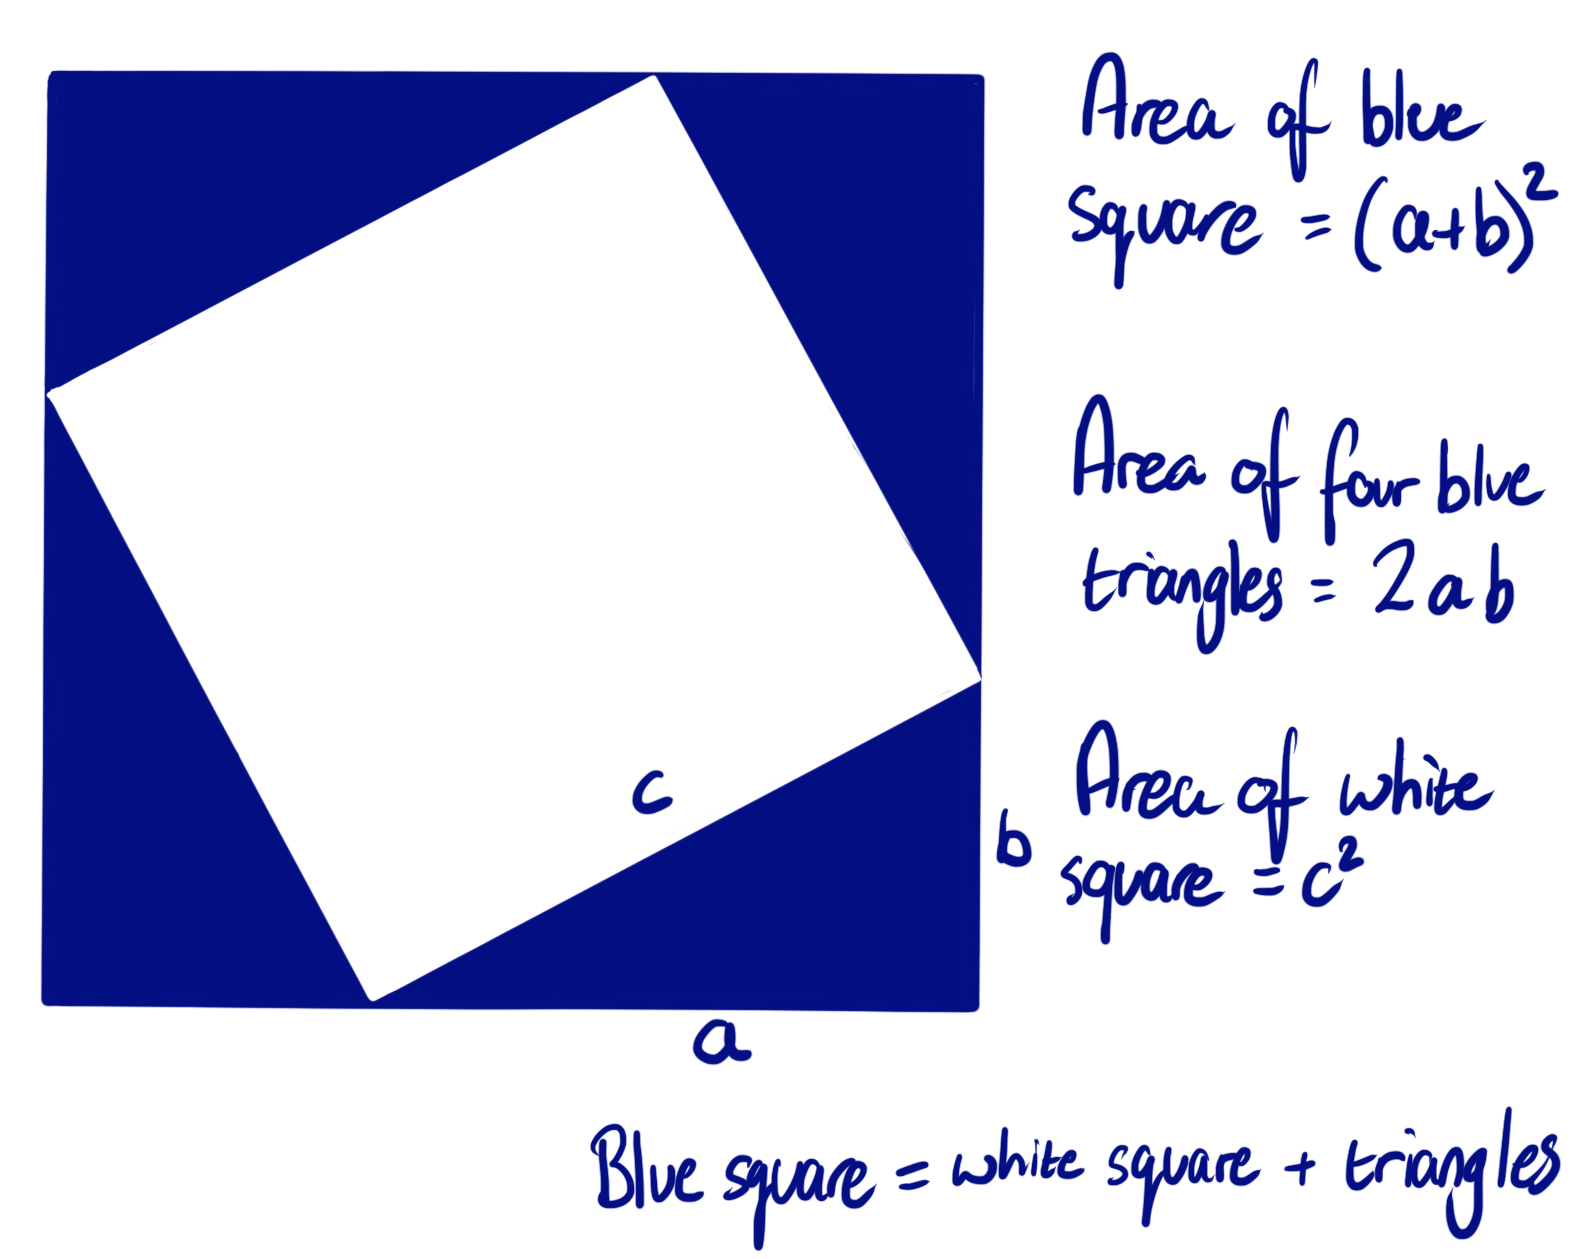 The area of the white square plus triangles is the area of the blue square